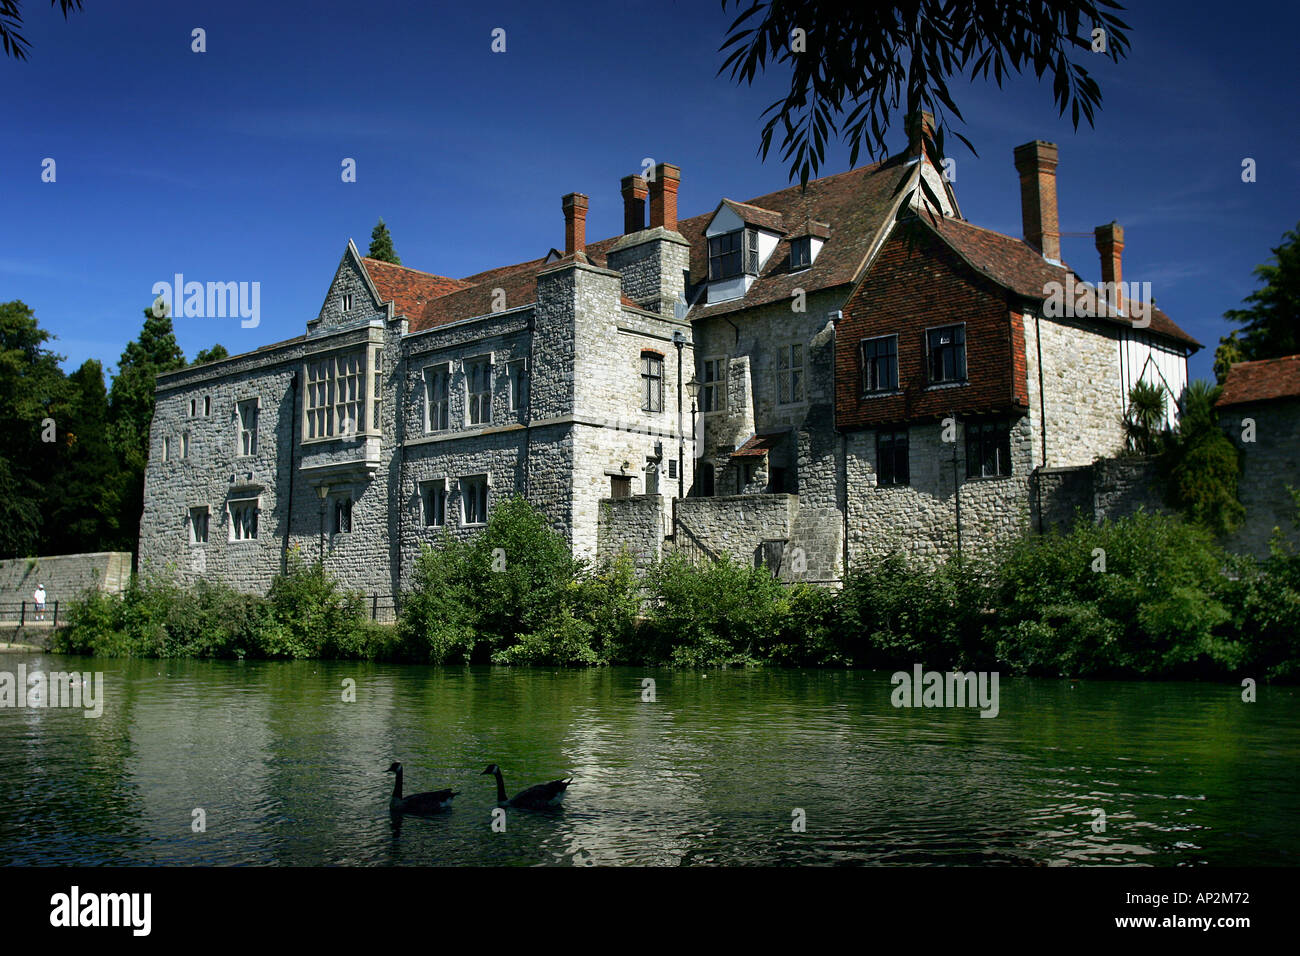 The Bishops Palace on the banks of the River Medway in Maidstone Kent UK Stock Photo